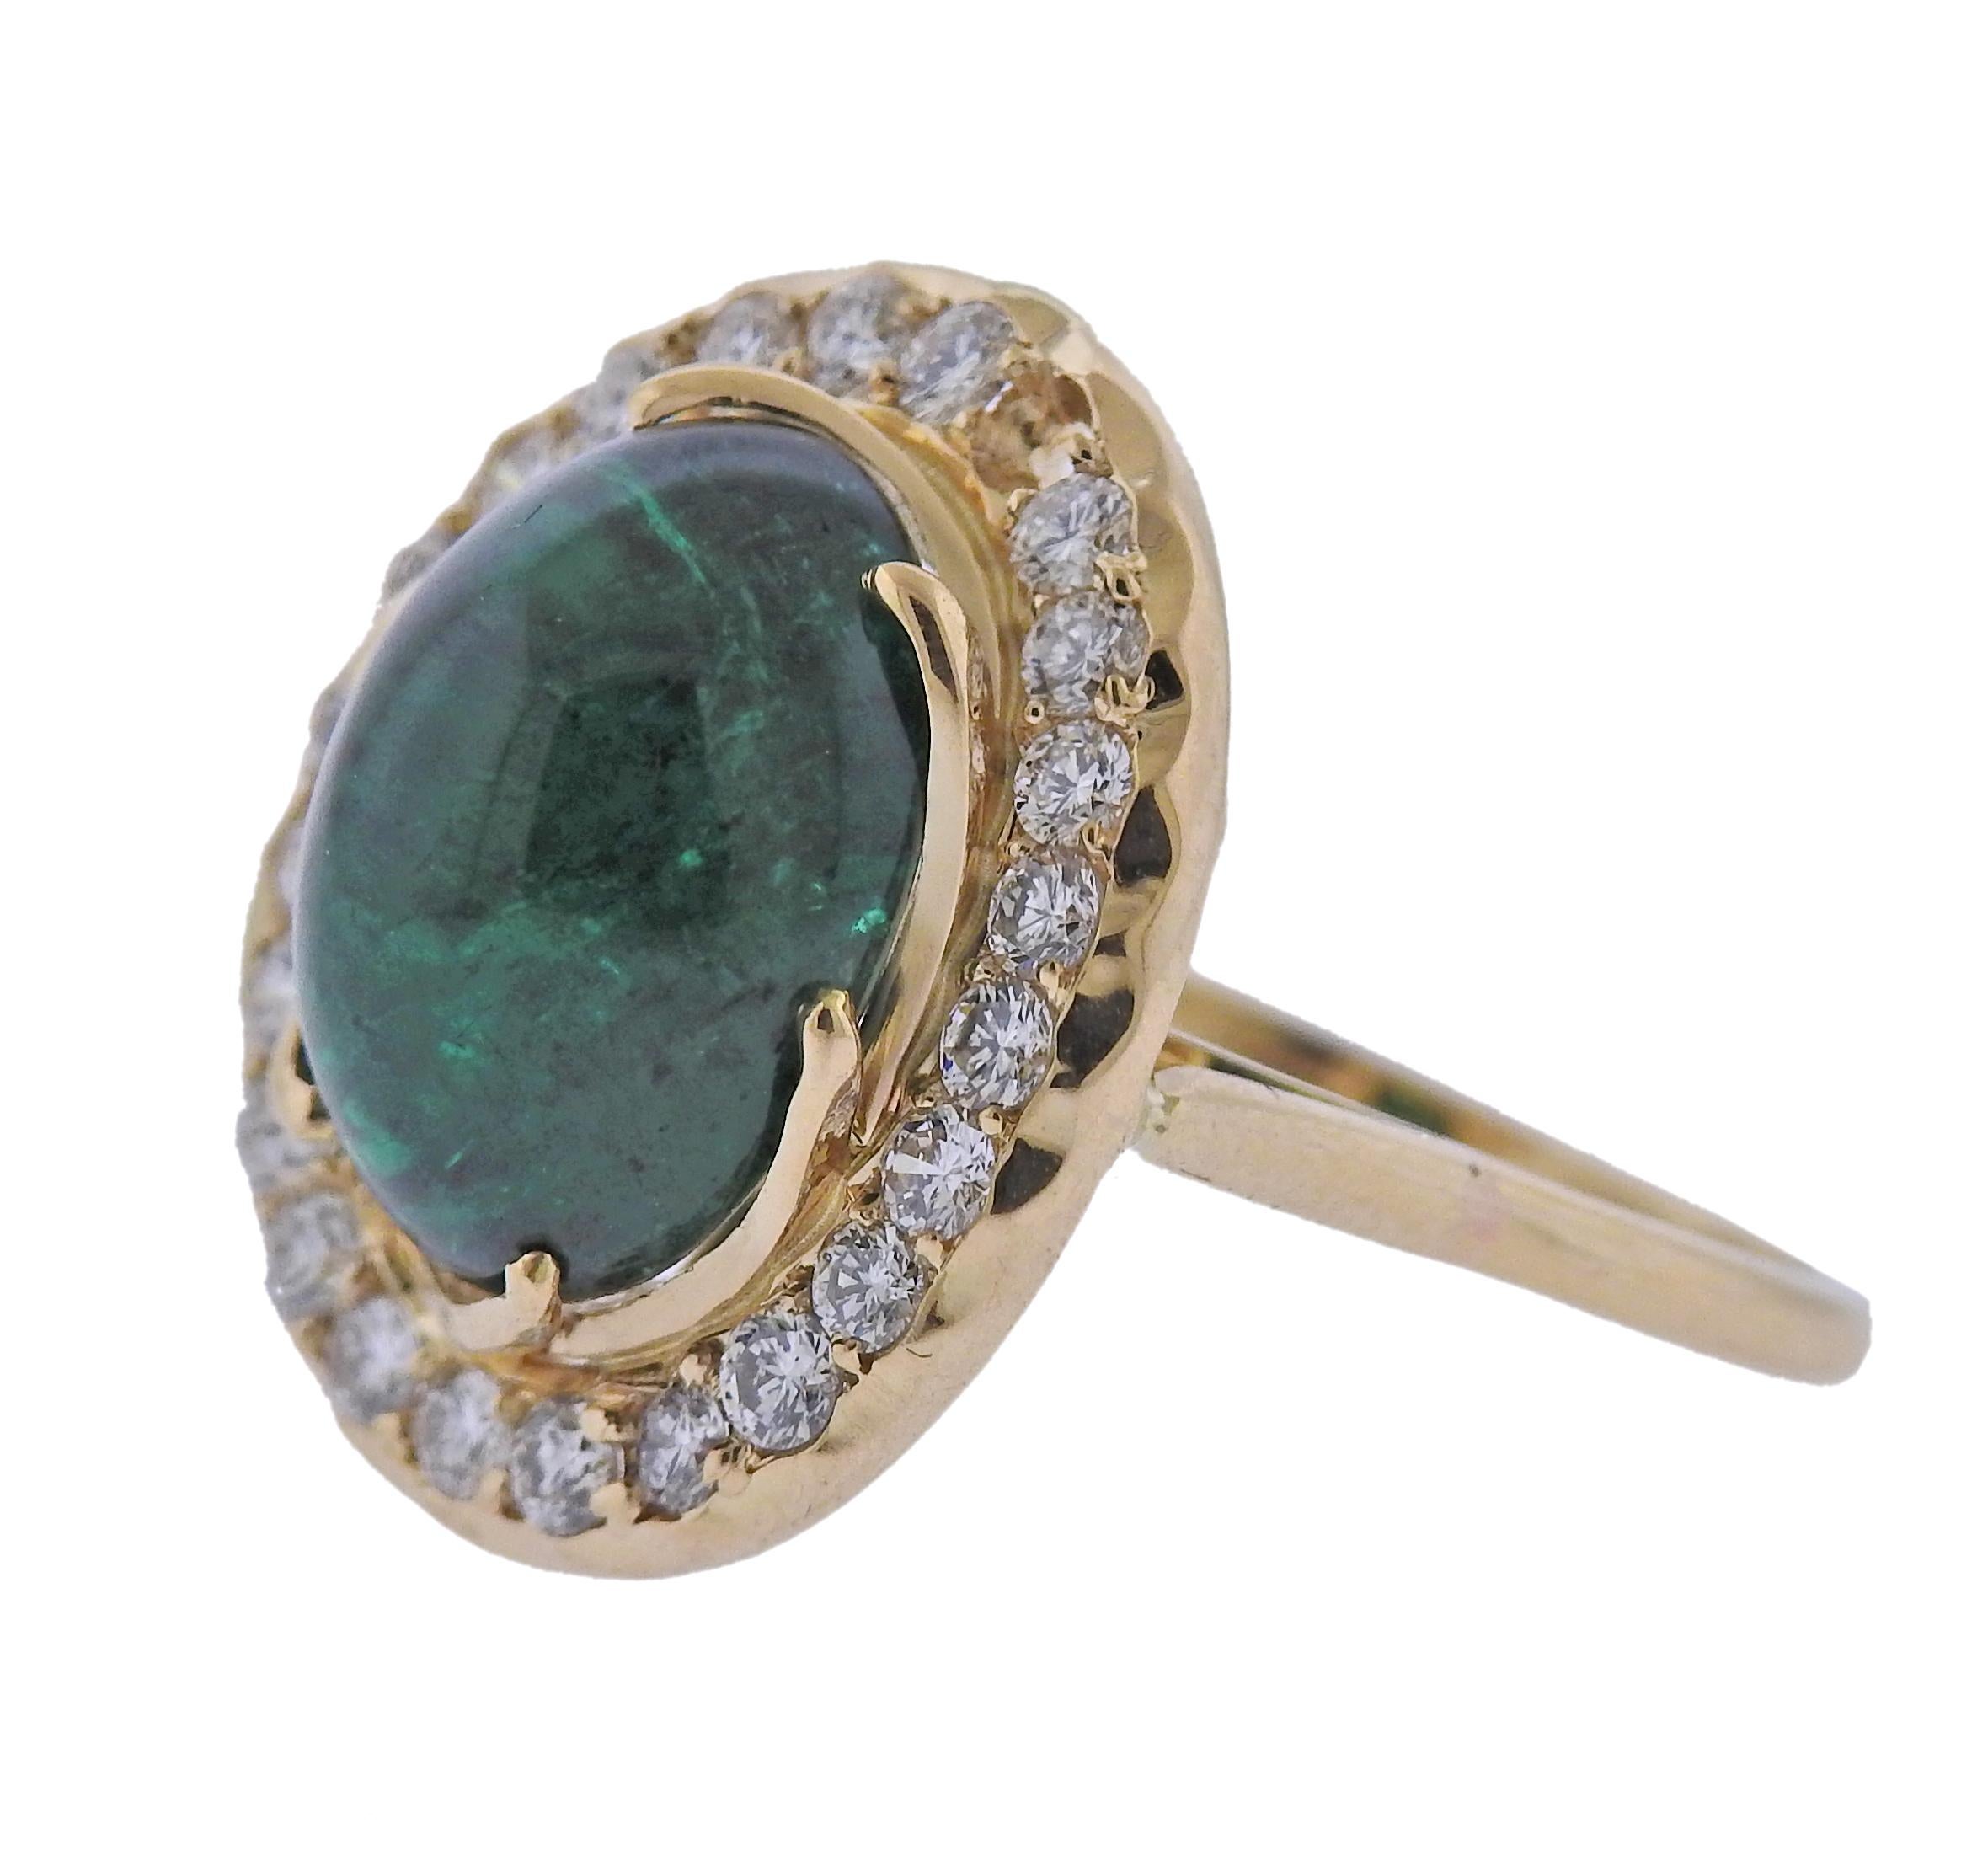 18k gold cocktail ring, with center approx. 7.75ct emerald cabochon (stone measures approx. 13.65 x 10.55 x 7.2mm) surrounded with approx. 0.72ctw in diamonds (one stone is missing). Ring size - 7, ring top is 20mm x 17mm. Marked: 750. Weight - 8.1